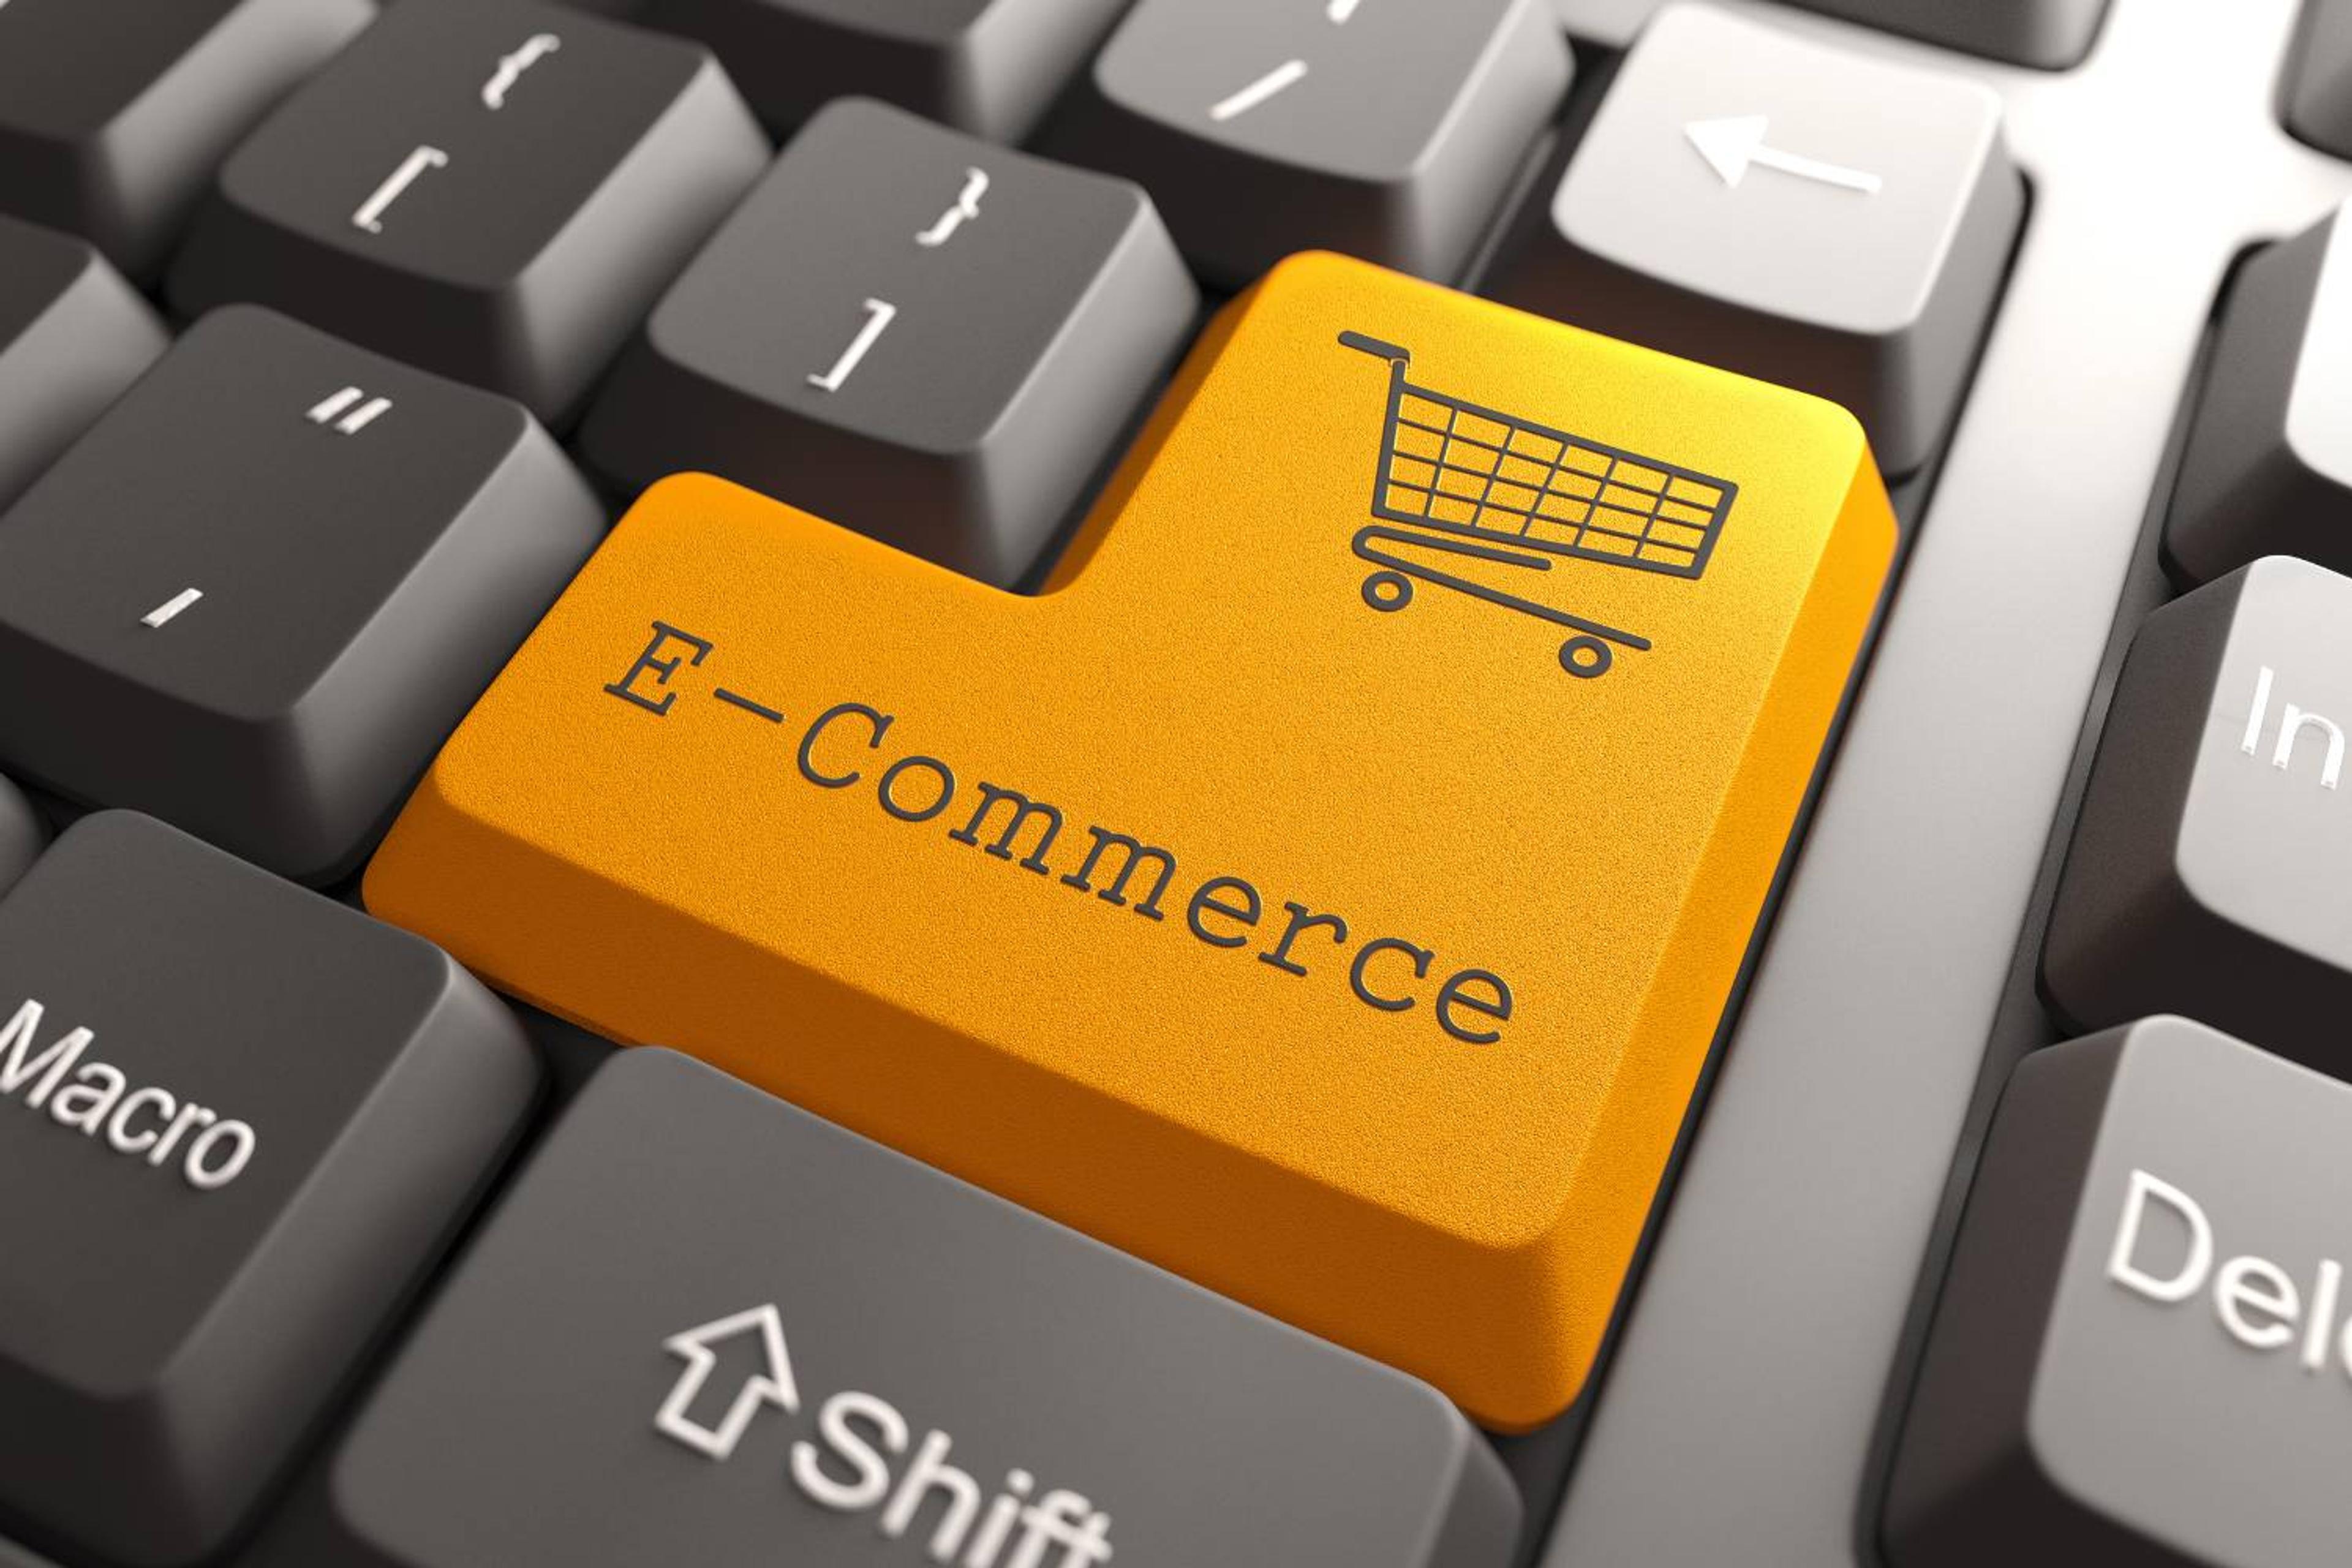 Illustration of a button signaling ecommerce on a laptop.